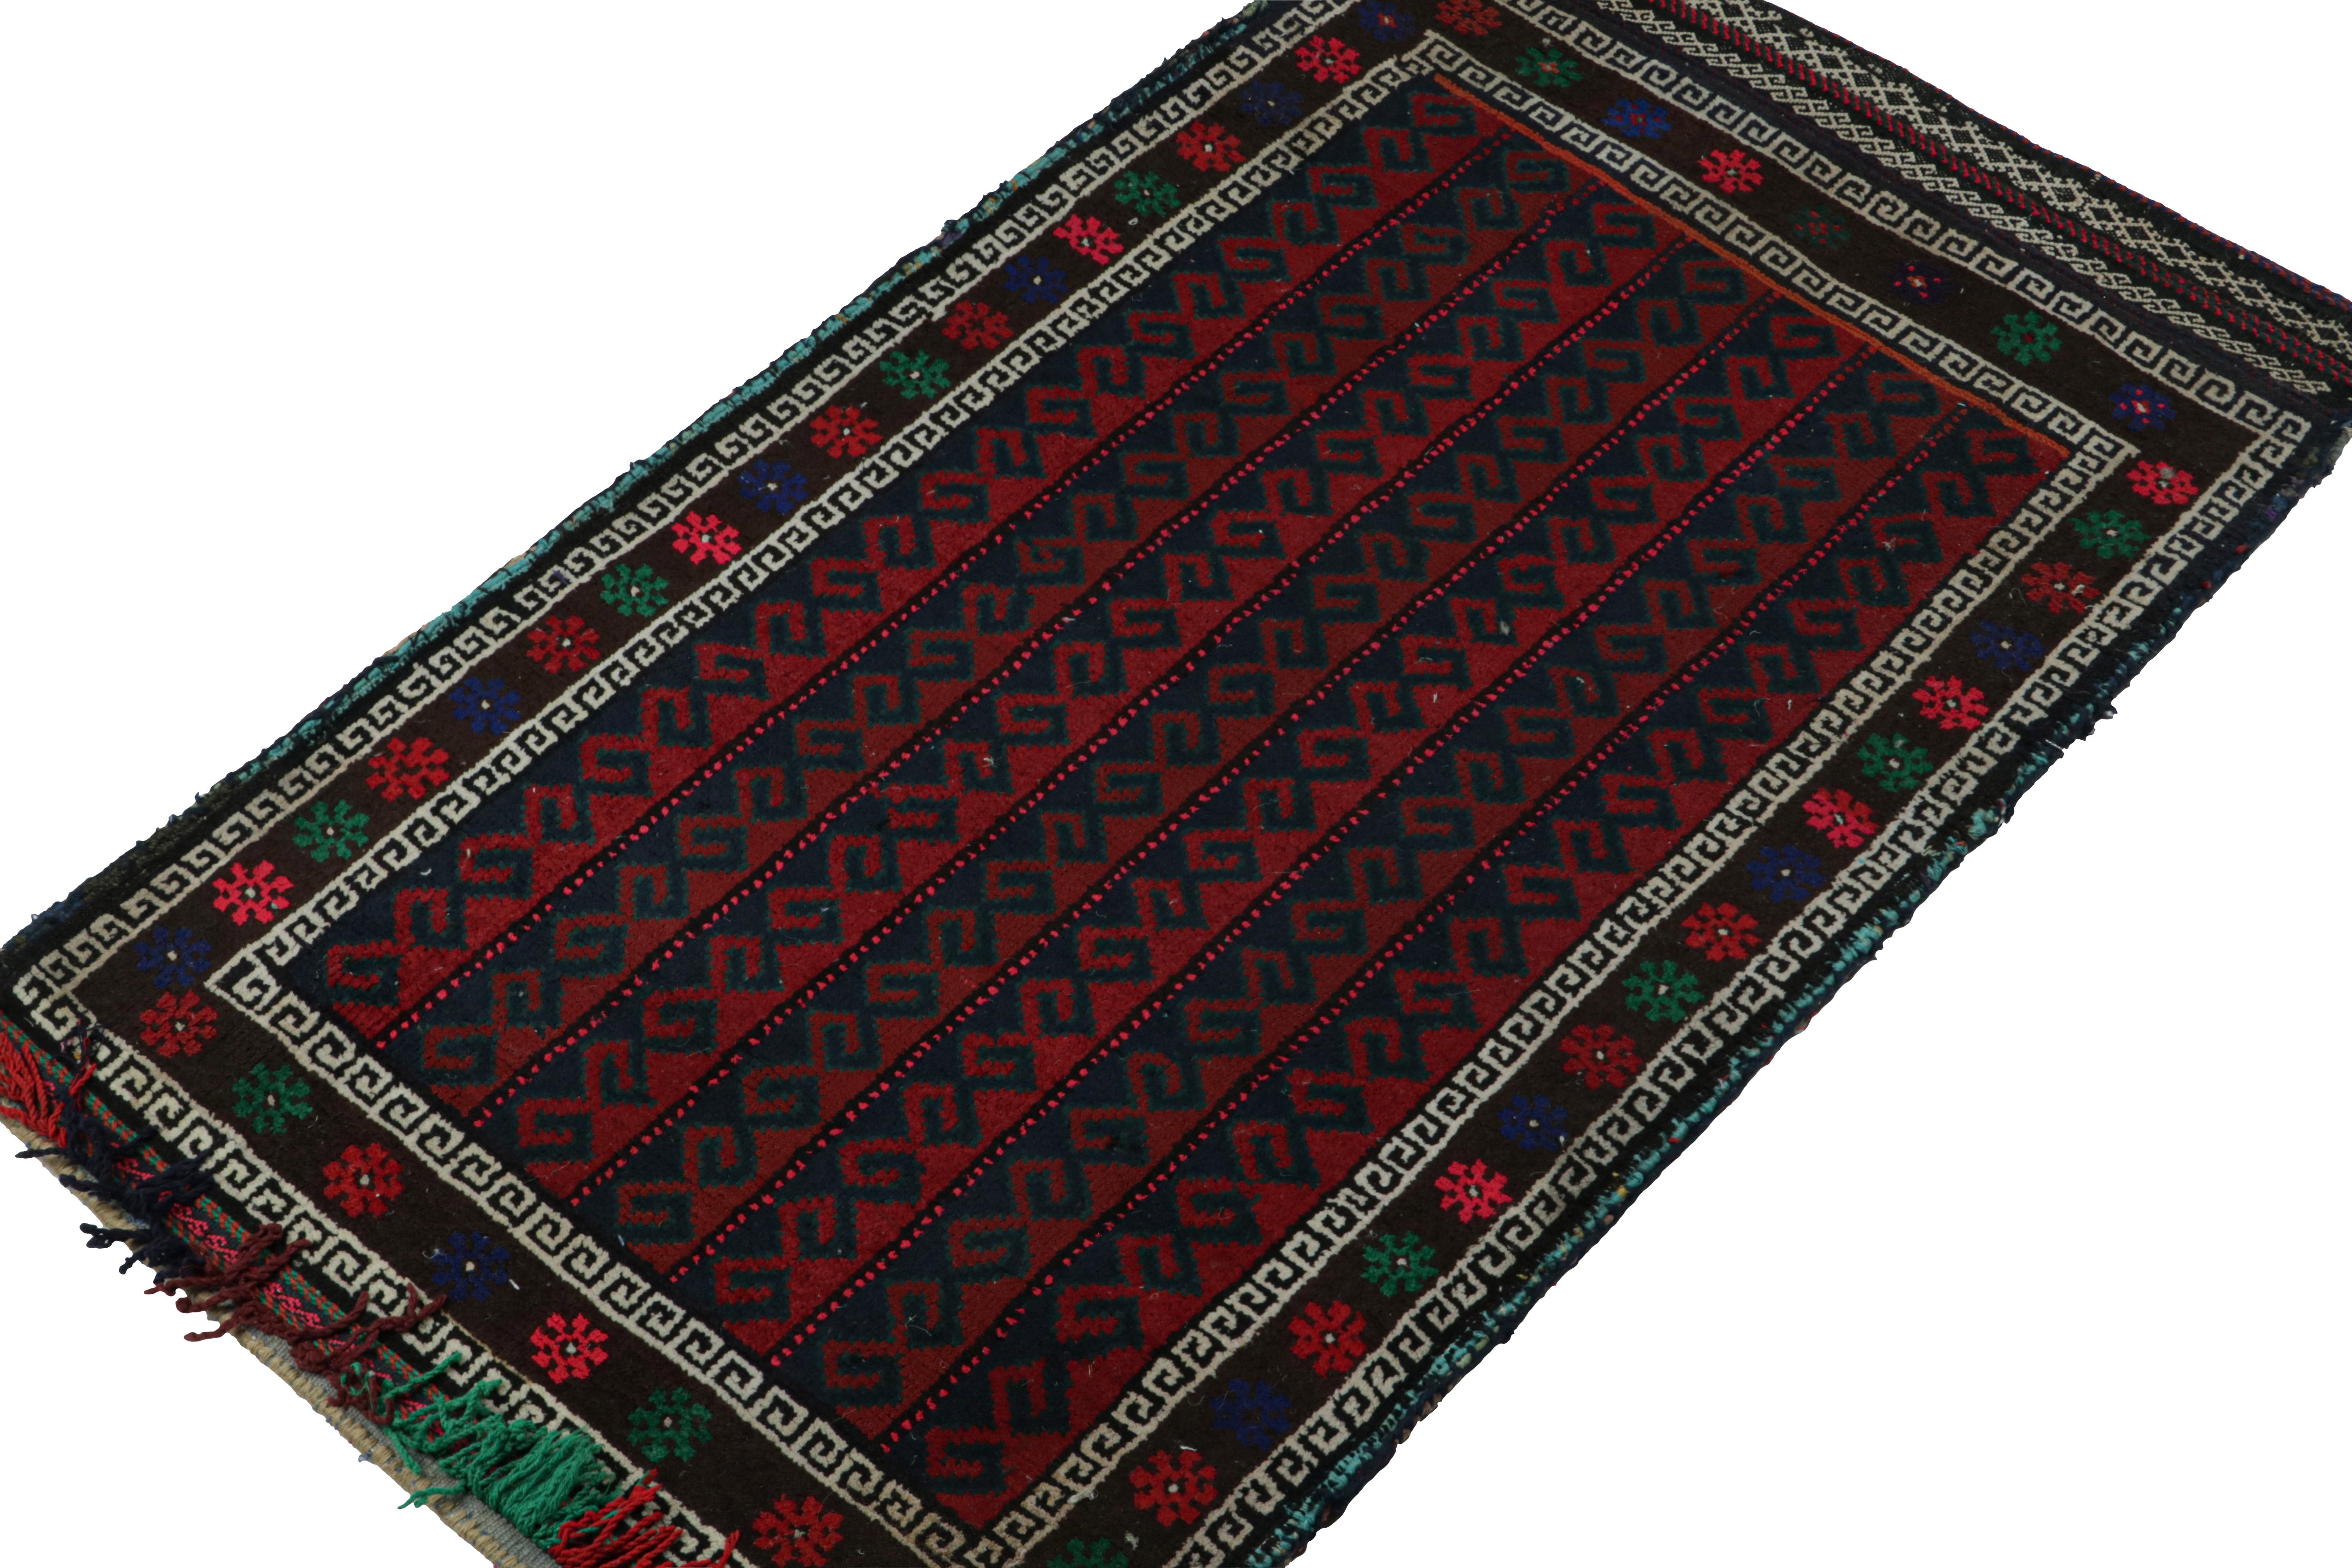 Hand-knotted in wool, this 2x3 Baluch Persian rug of the 1950s is the latest to enter Rug & Kilim’s Antique & Vintage collection.

On the Design:

The vintage Baluch rug carries tribal patterns in rich tones of red, white, blue & black. The field is